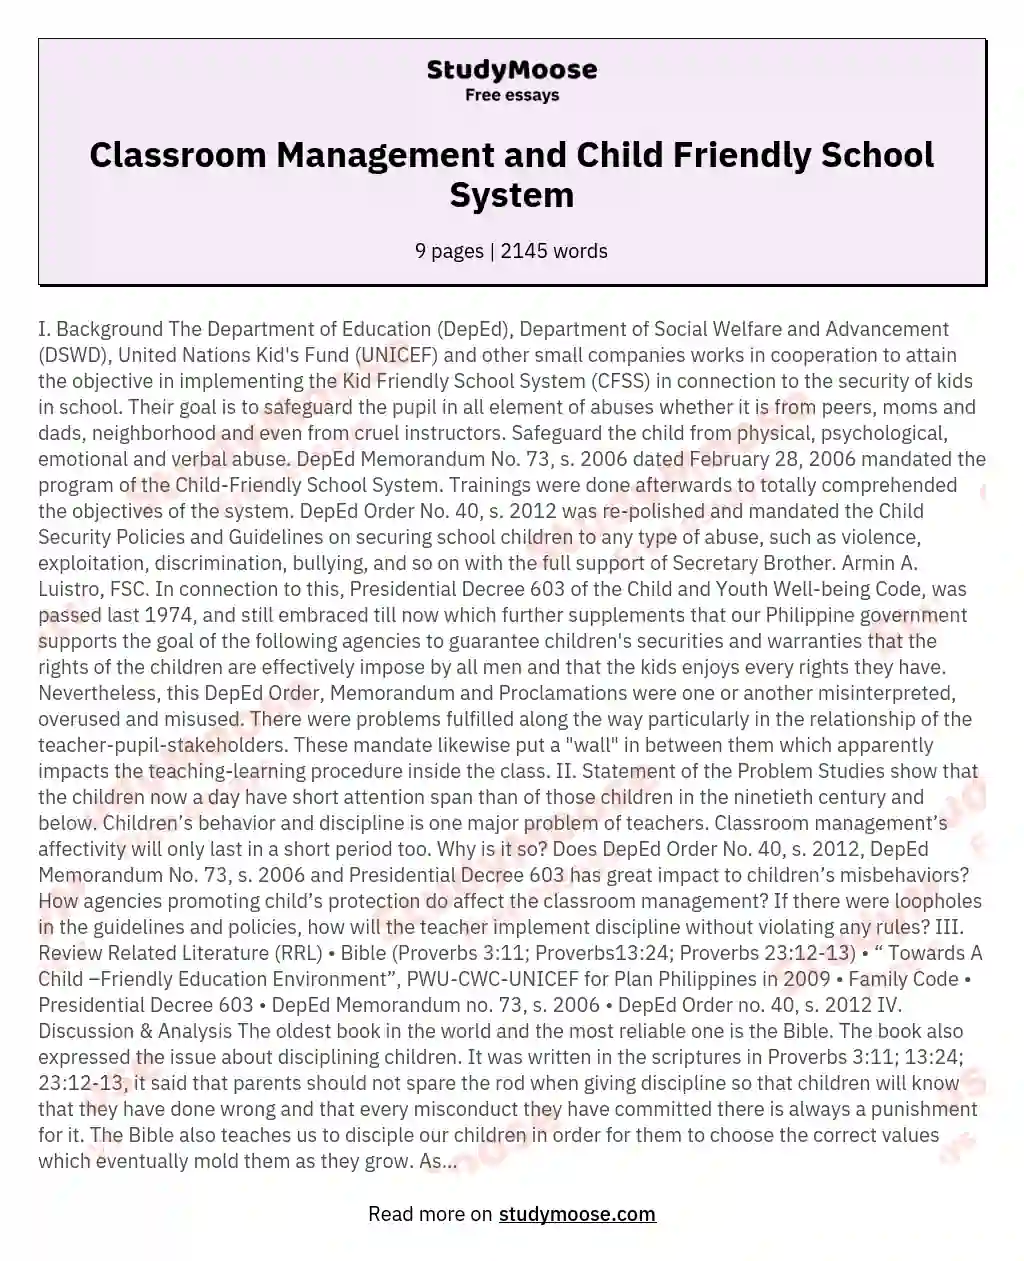 Classroom Management and Child Friendly School System